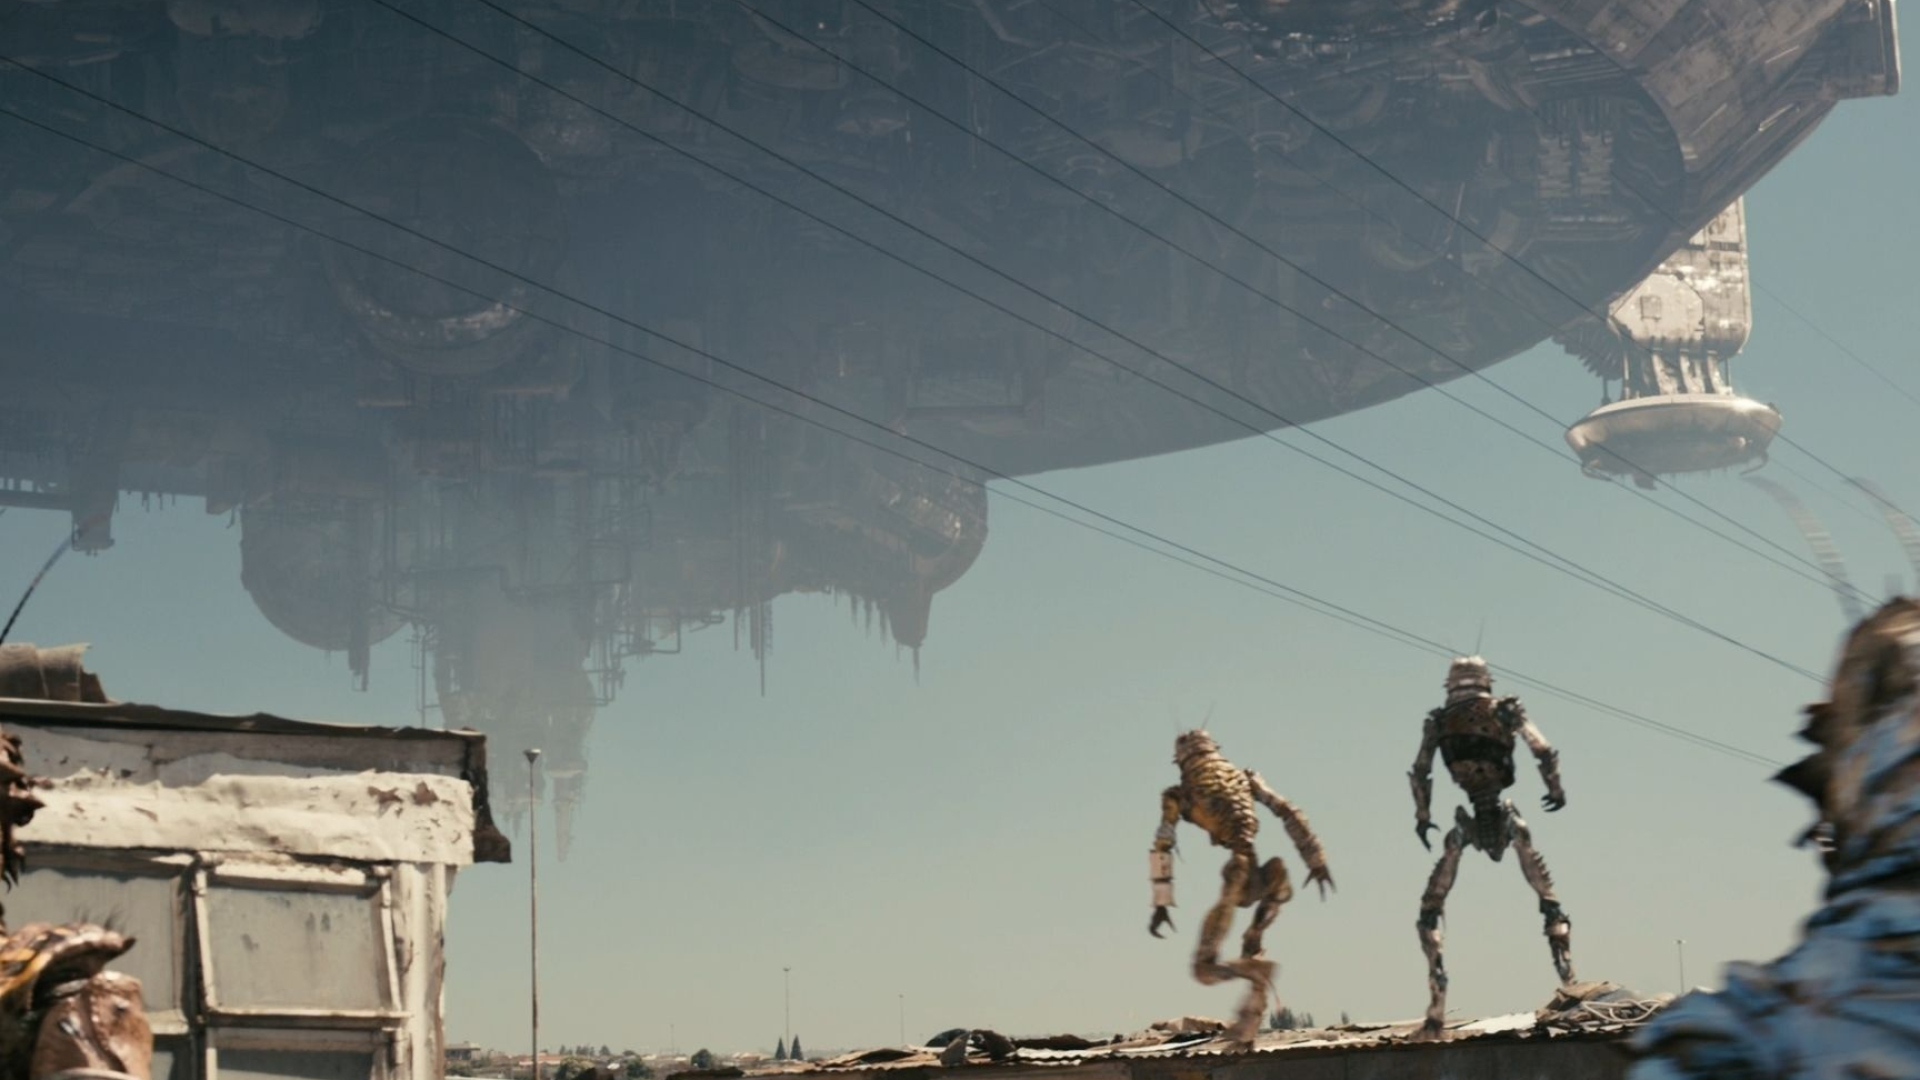 District 9: Science fi movie, Survival film, Shot on location in Chiawelo, Soweto. 1920x1080 Full HD Wallpaper.